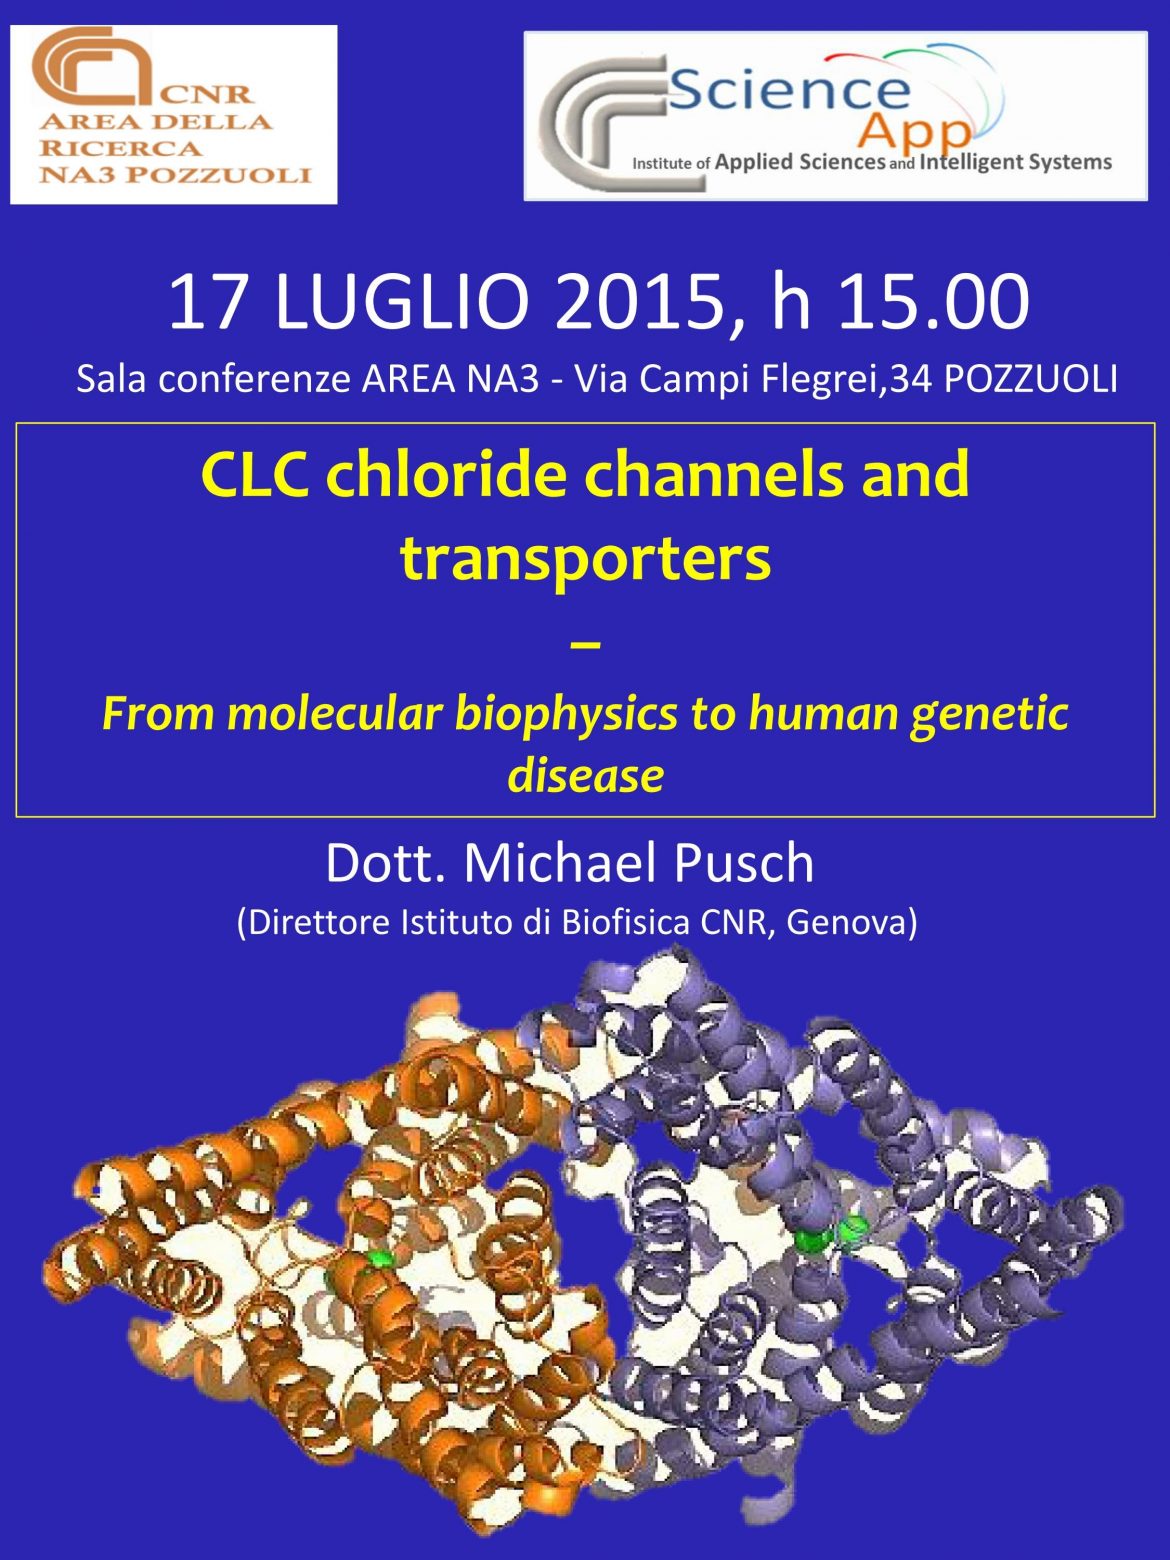 CLC chloride channels and transporters